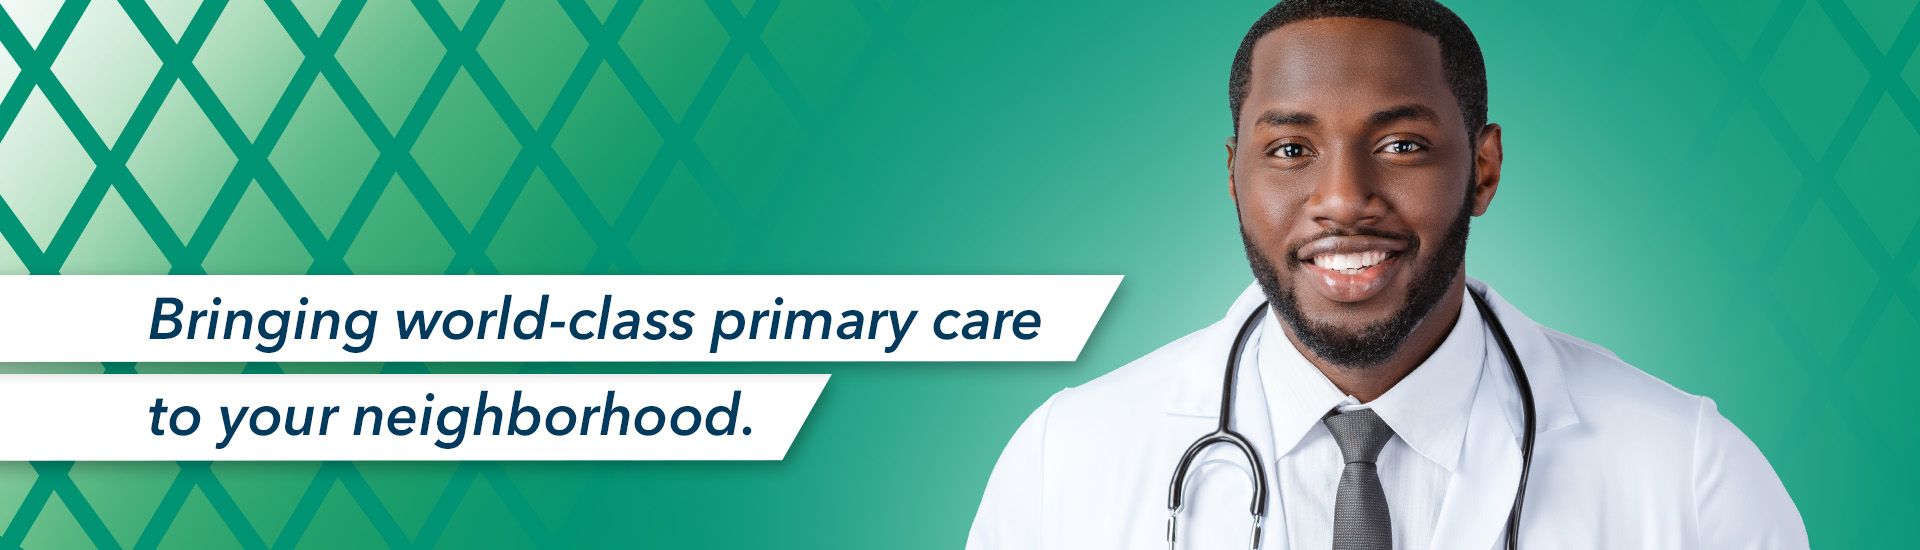 Bringing World-Class Primary Care to Your Neighborhood